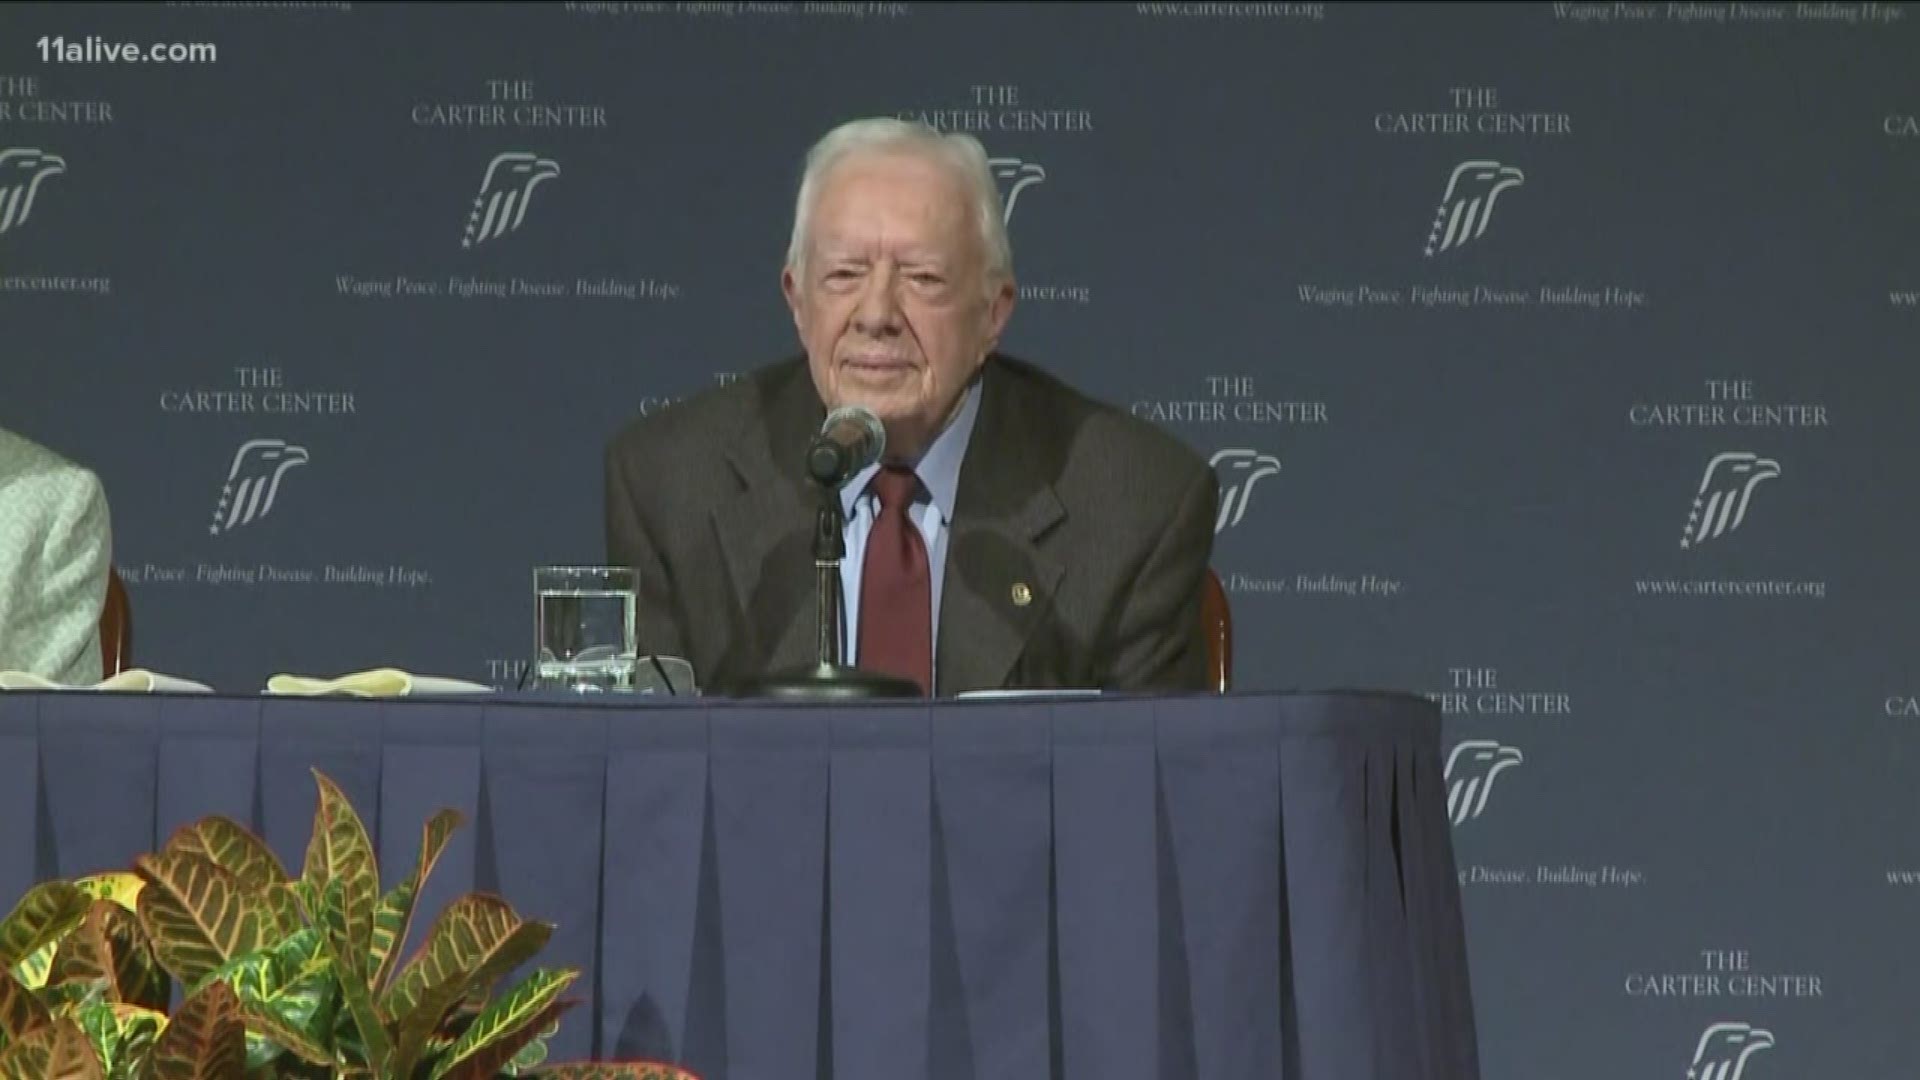 Carter's remark came in response to a joking question about whether he had considered running in 2020...since he's still constitutionally allowed another term.